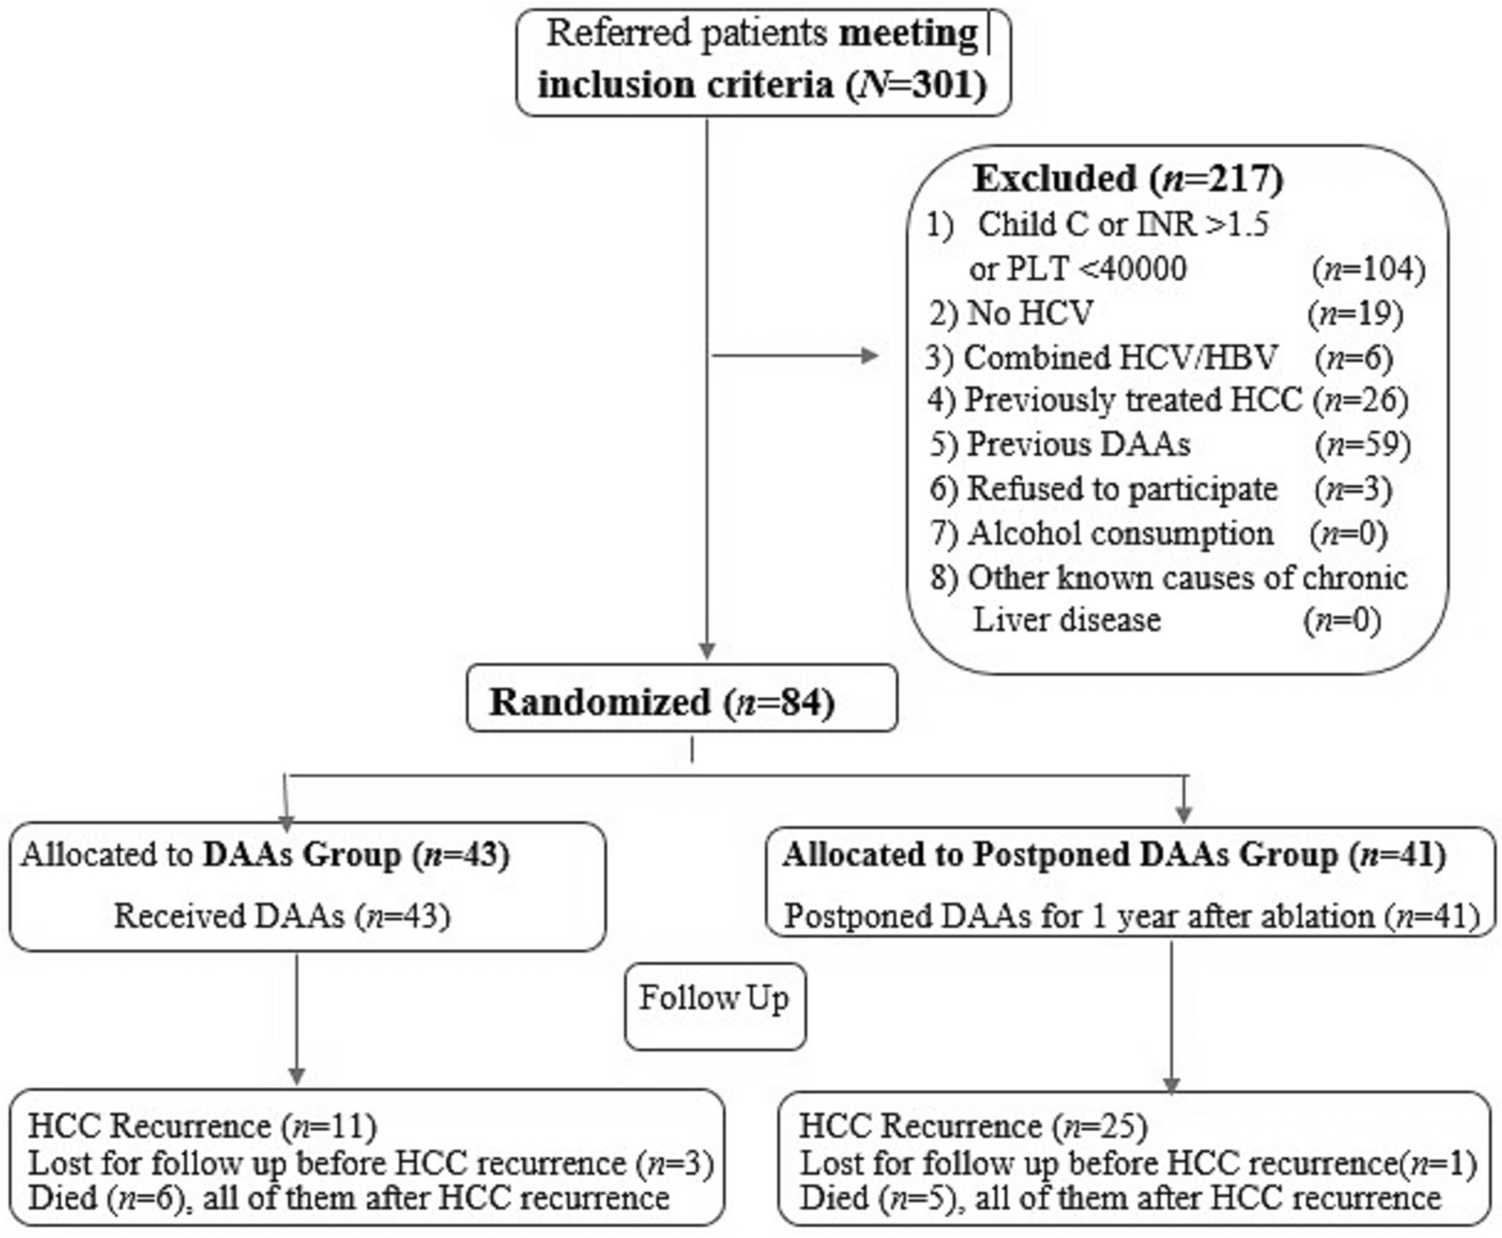 Hepatitis C Virus-Related One-Year Hepatocellular Carcinoma Recurrence After Directly Acting Antivirals: A Randomized Controlled Trial